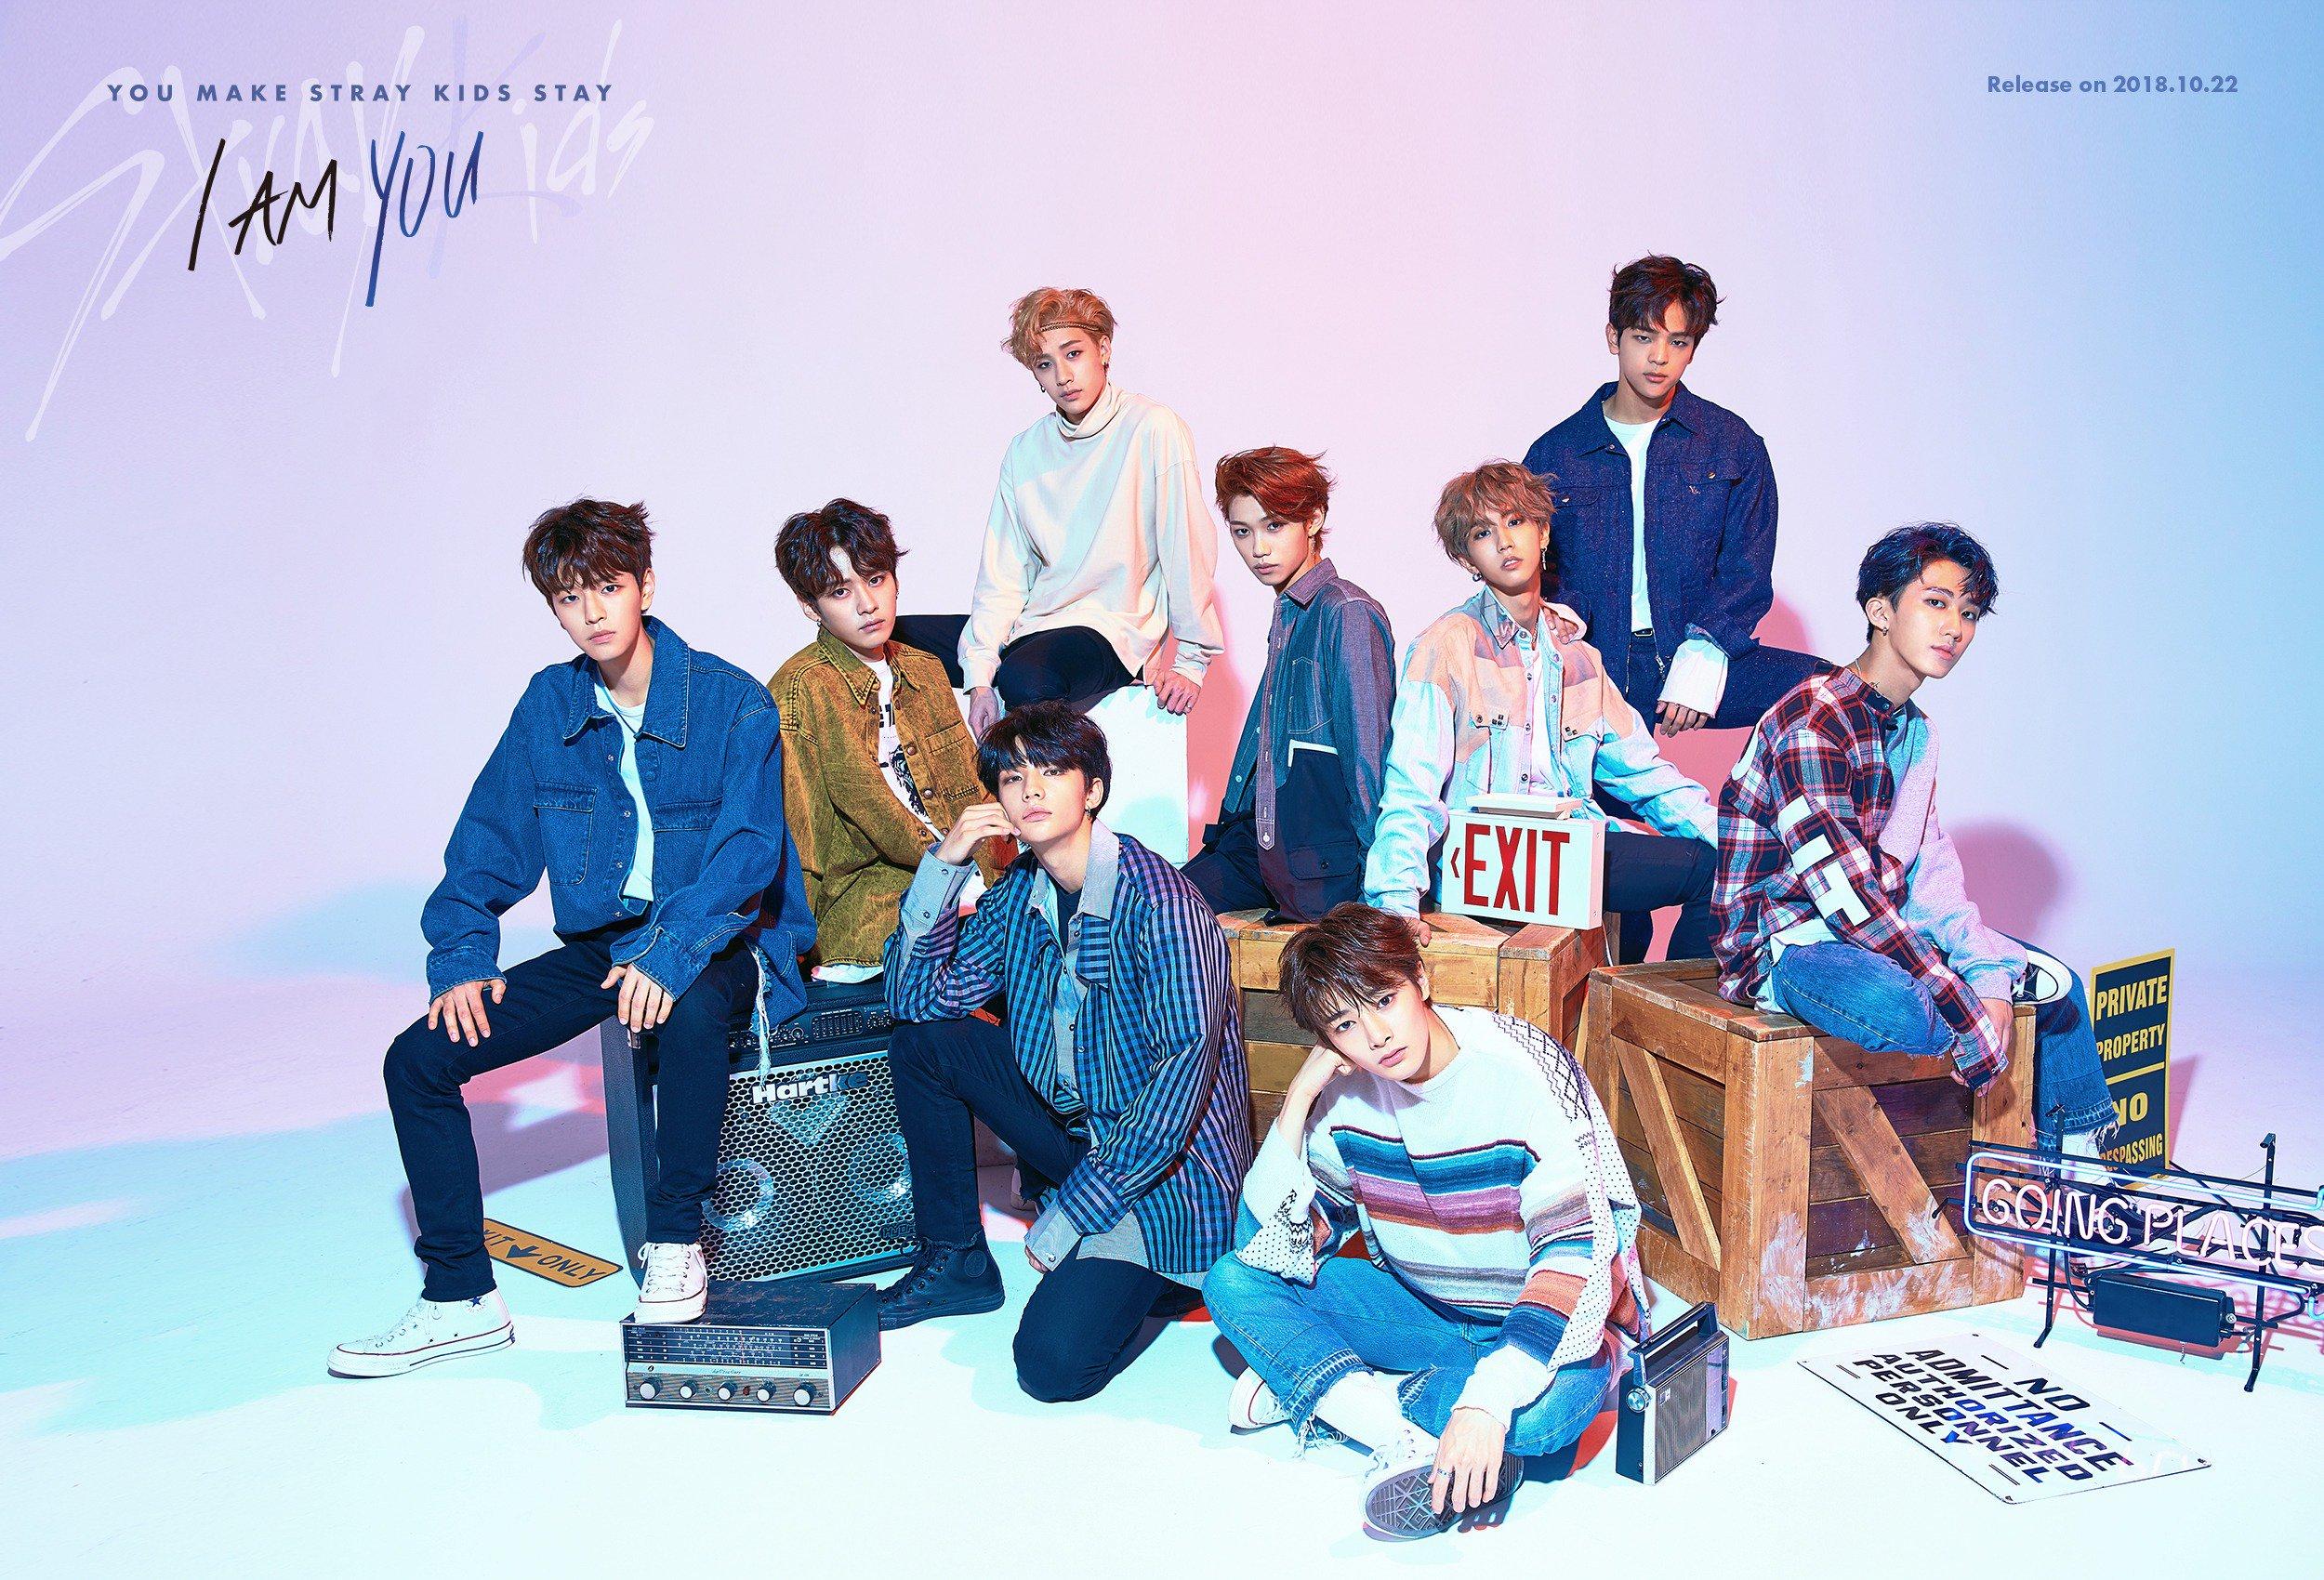 Stray Kids am YOU Group Teaser Image